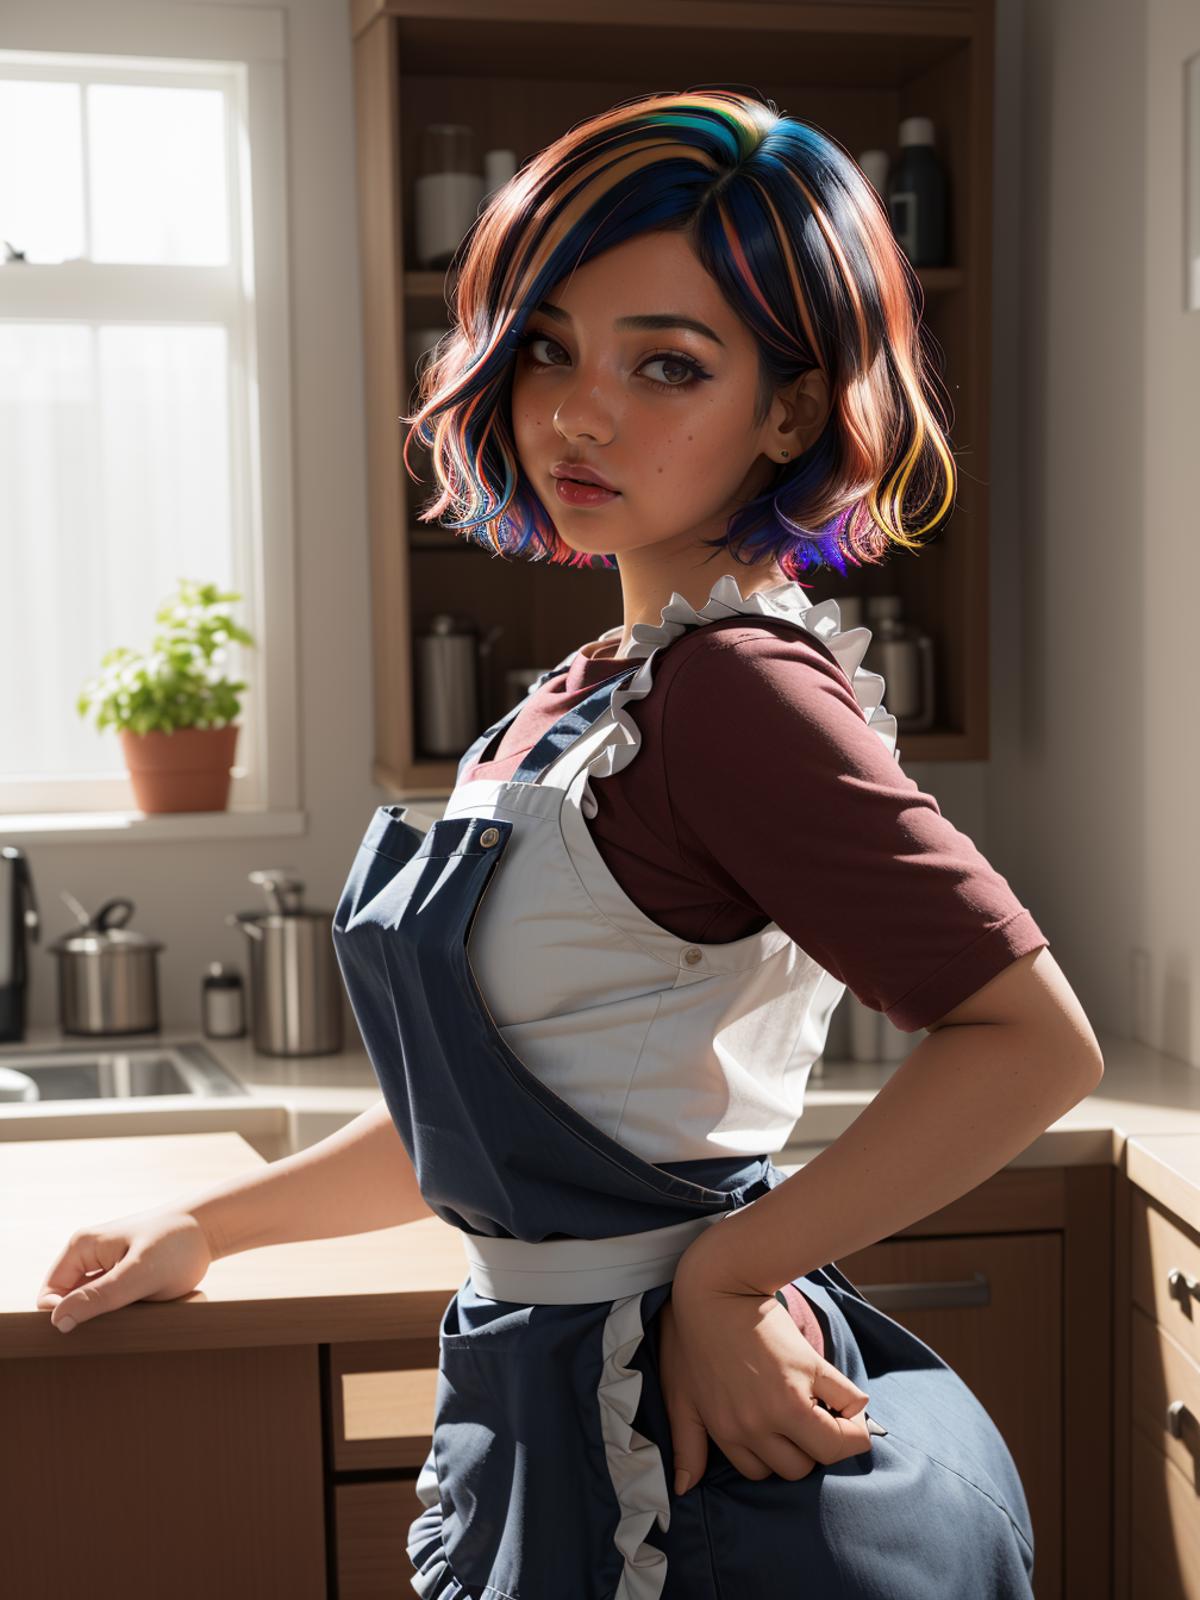 A woman wearing a blue and white apron standing in a kitchen.